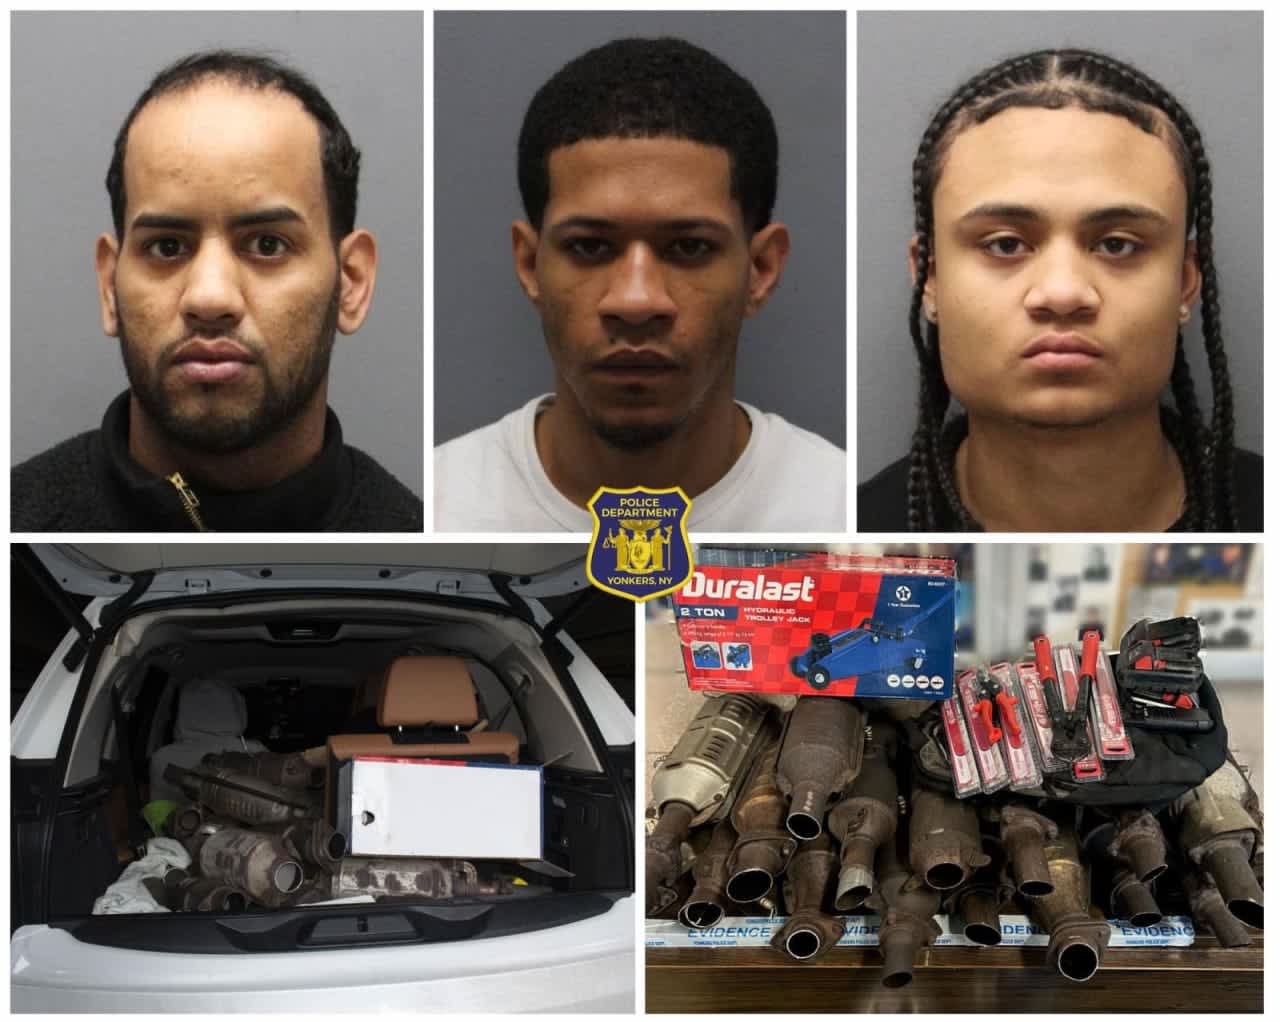 Three men were caught with 17 suspected stolen catalytic converters at a parking garage in Westchester.